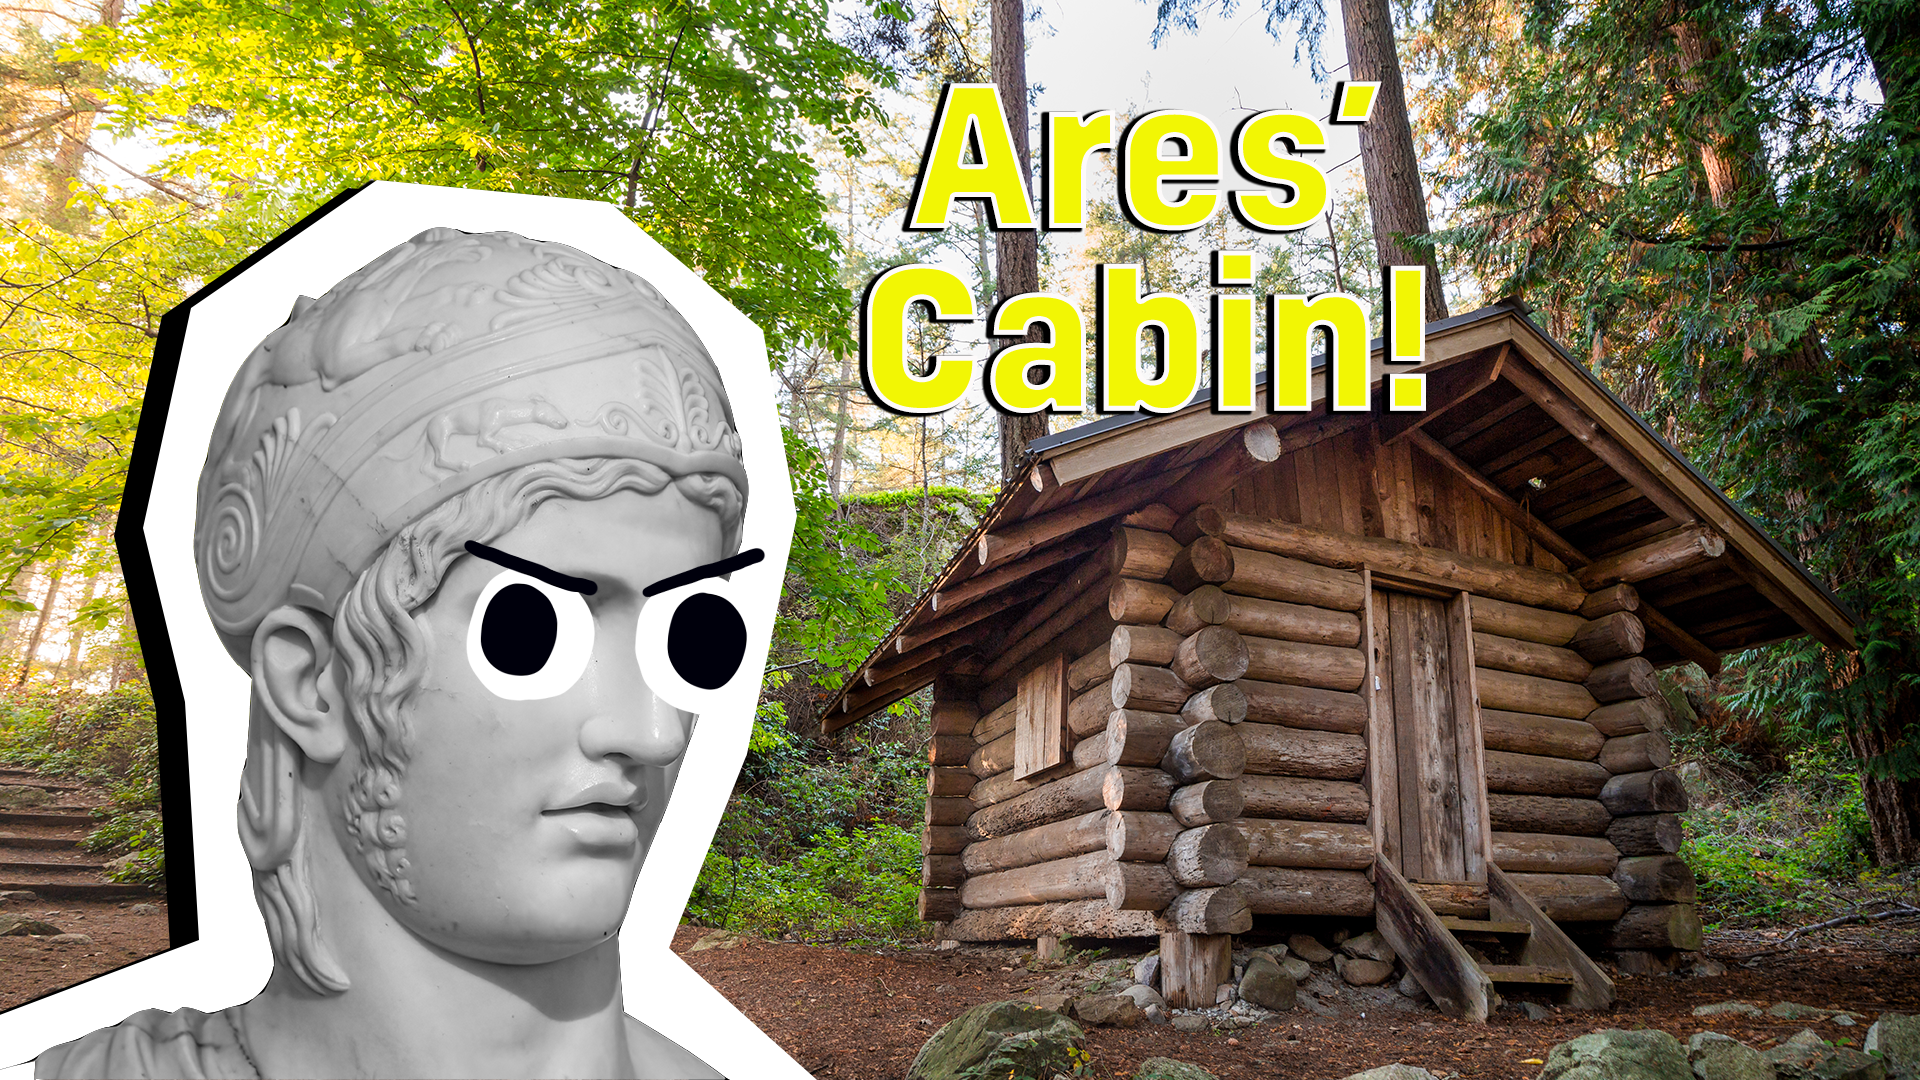 Which Percy Jackson Cabin Do You Belong In?